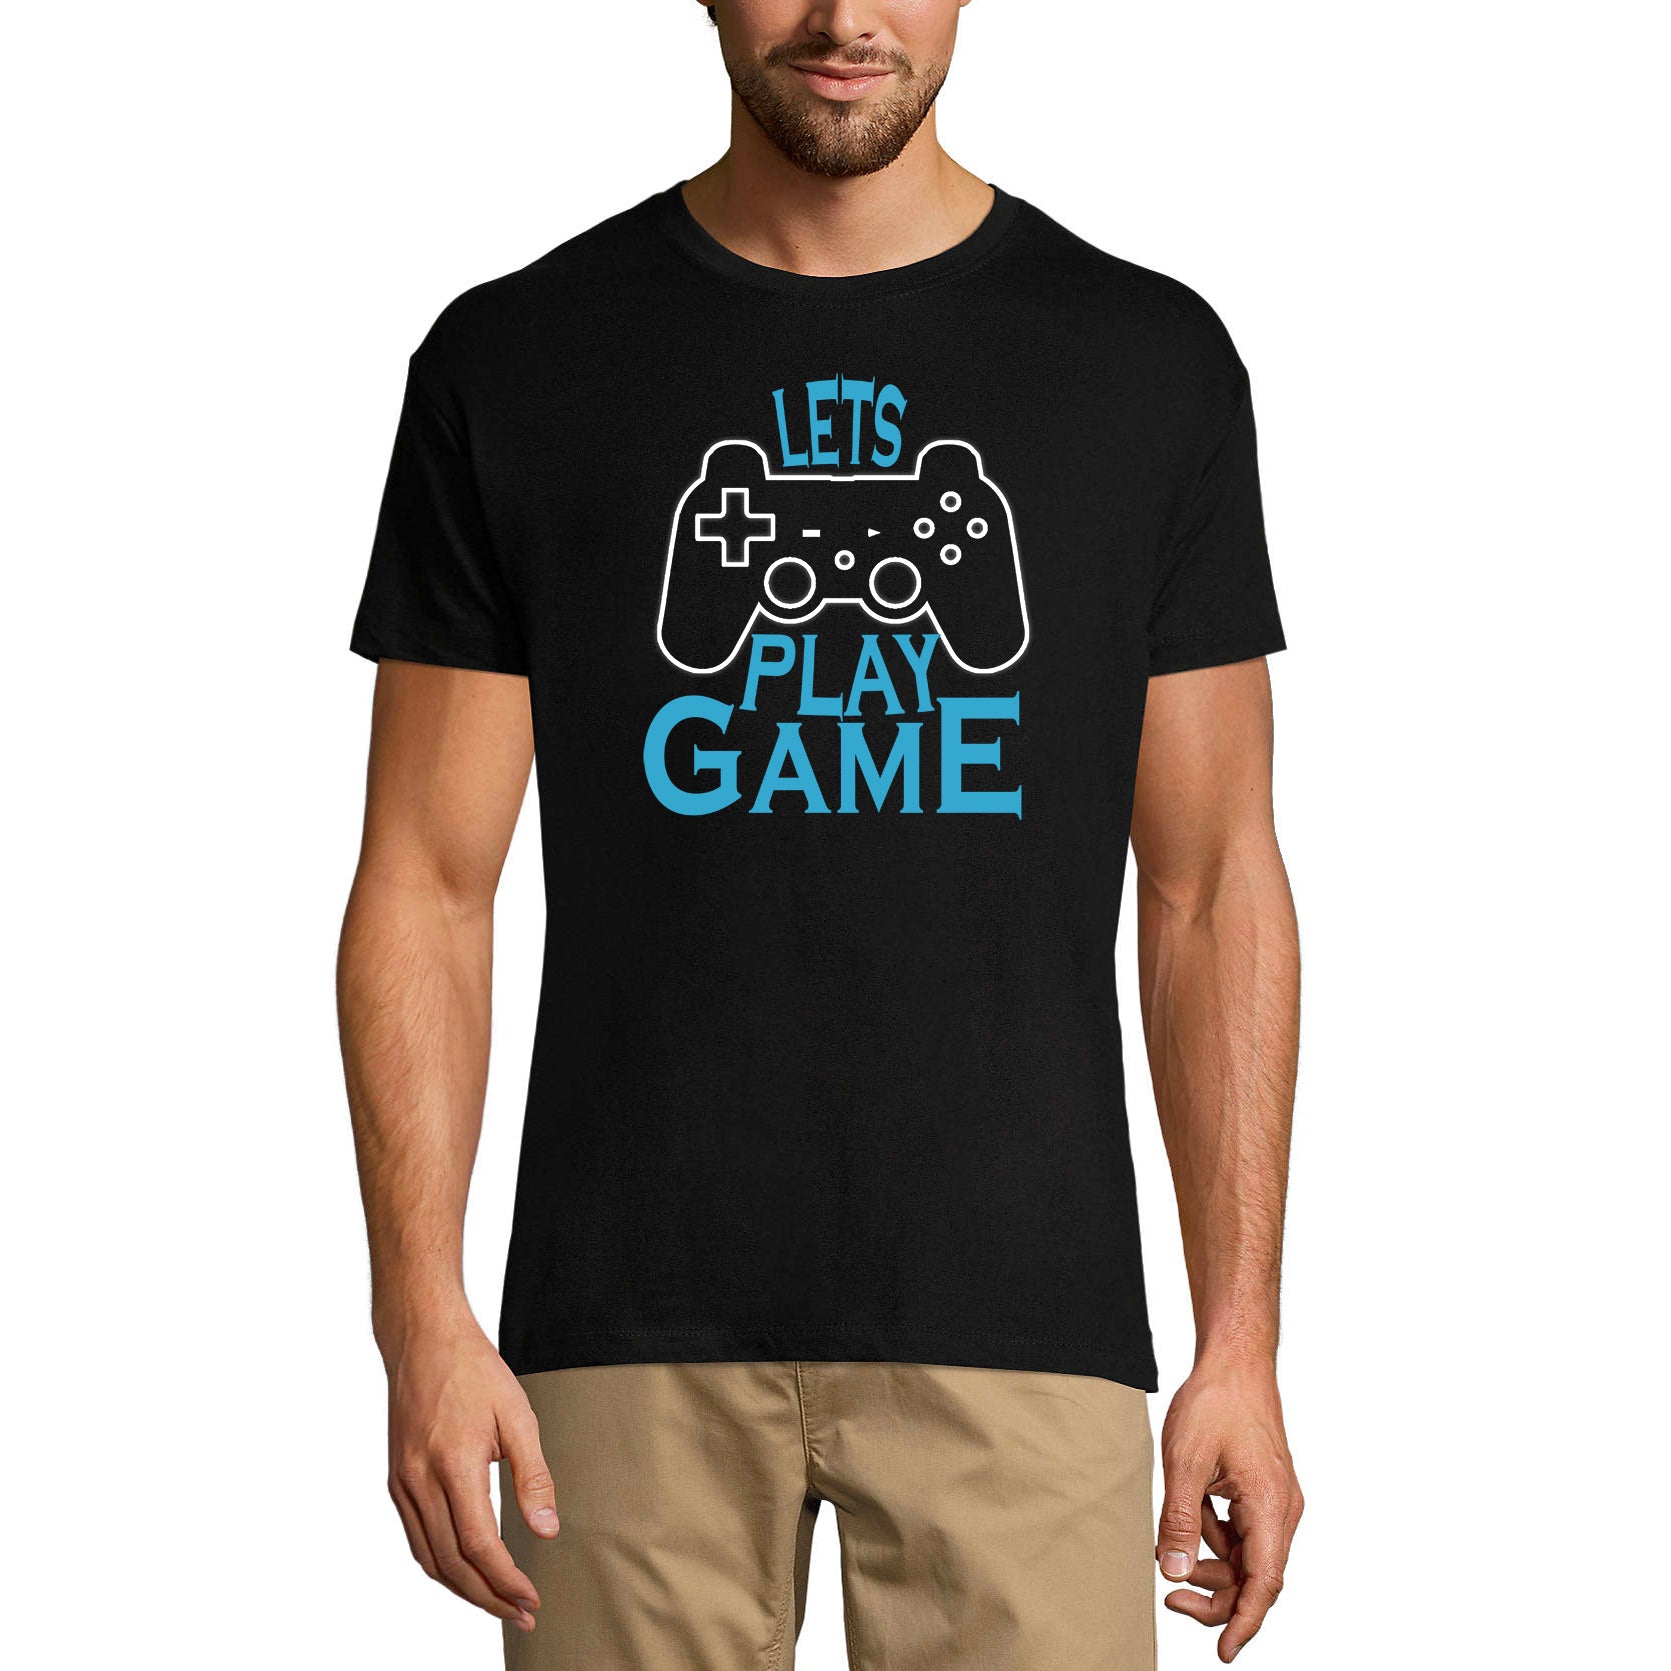 ULTRABASIC Men's T-Shirt Let's Play Game - Gaming Apparel for Men parenting life dad awesome gamer i paused my game alien player ufo playstation tee shirt clothes gaming apparel gifts super mario nintendo call of duty graphic tshirt video game funny geek gift for the gamer fortnite pubg humor son father birthday